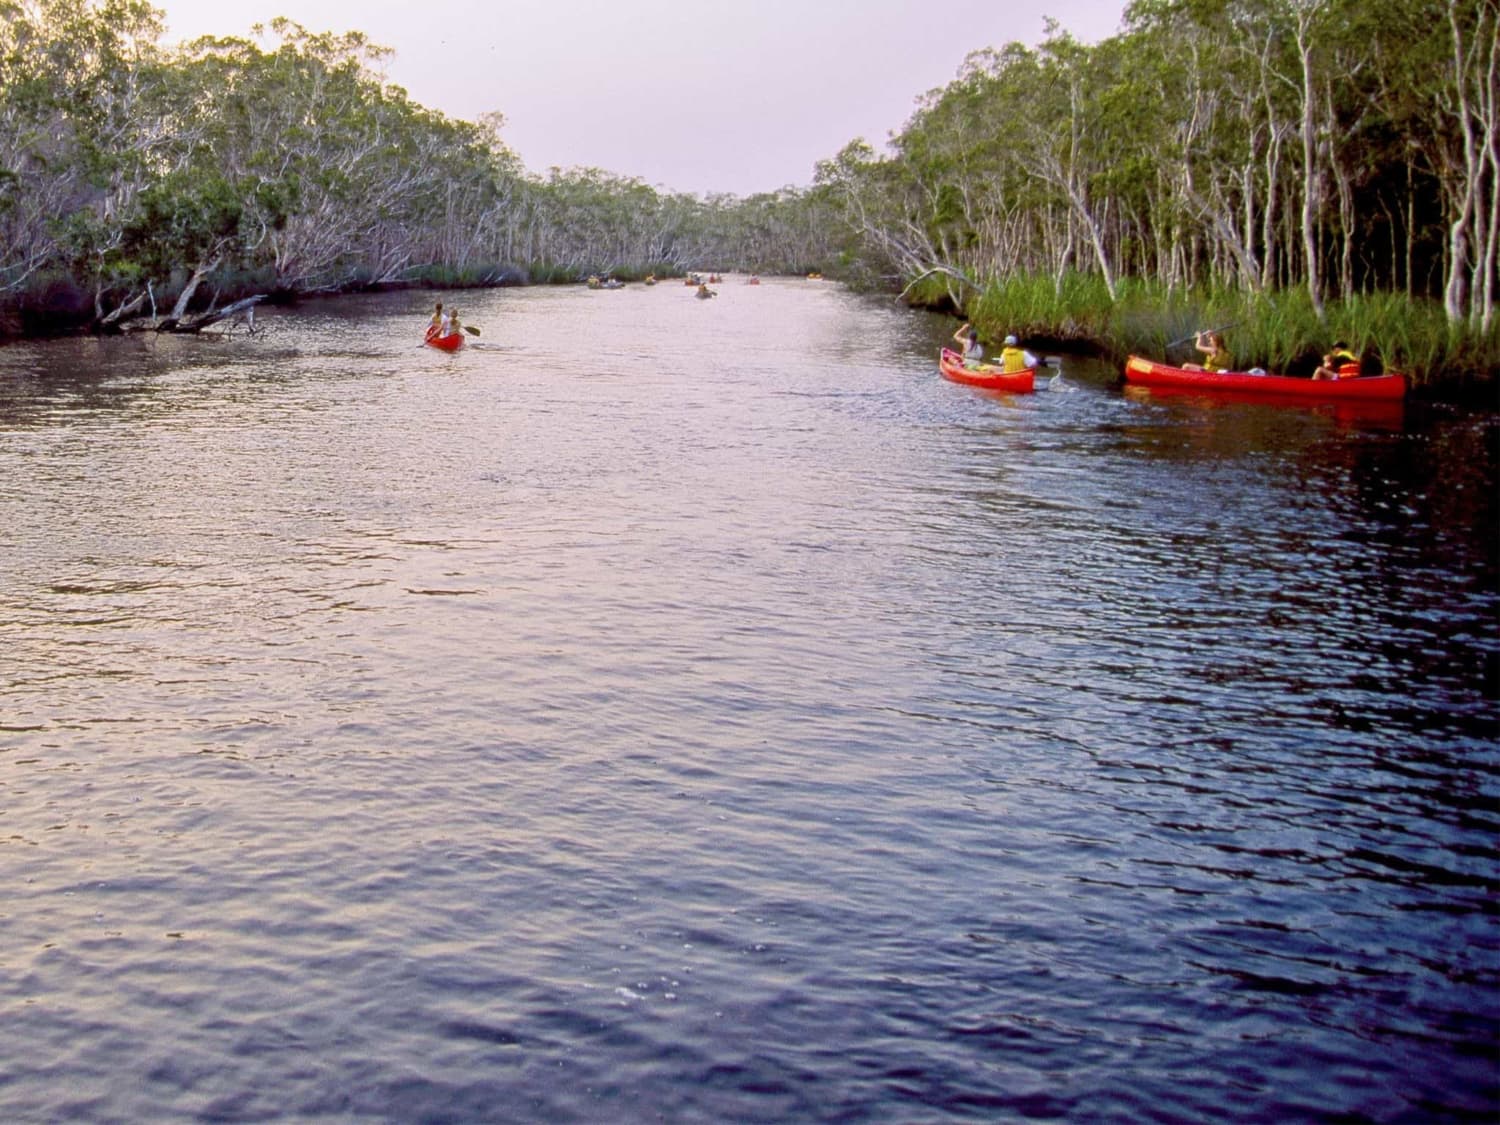 Embark on the ultimate canoeing adventure and experience the best remote river camping along the Upper Noosa River waterway by Adam Creed QLD